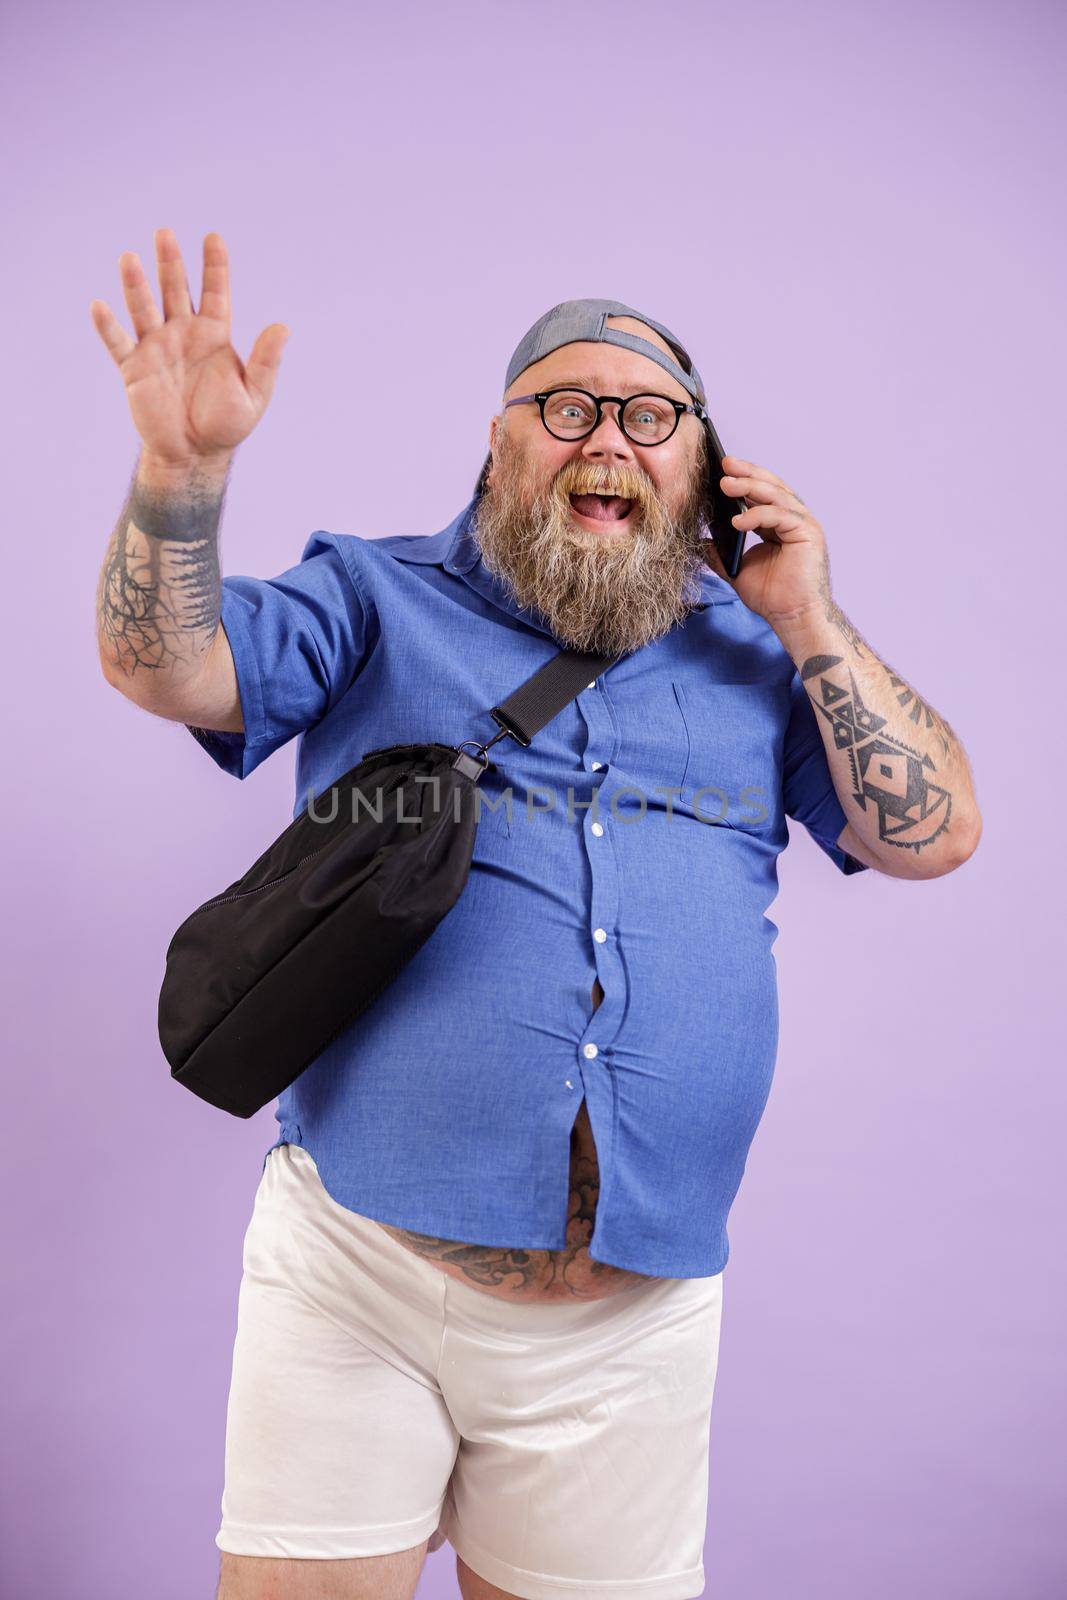 Jouful plump man talks by phone and waves hand standing on purple background by Yaroslav_astakhov